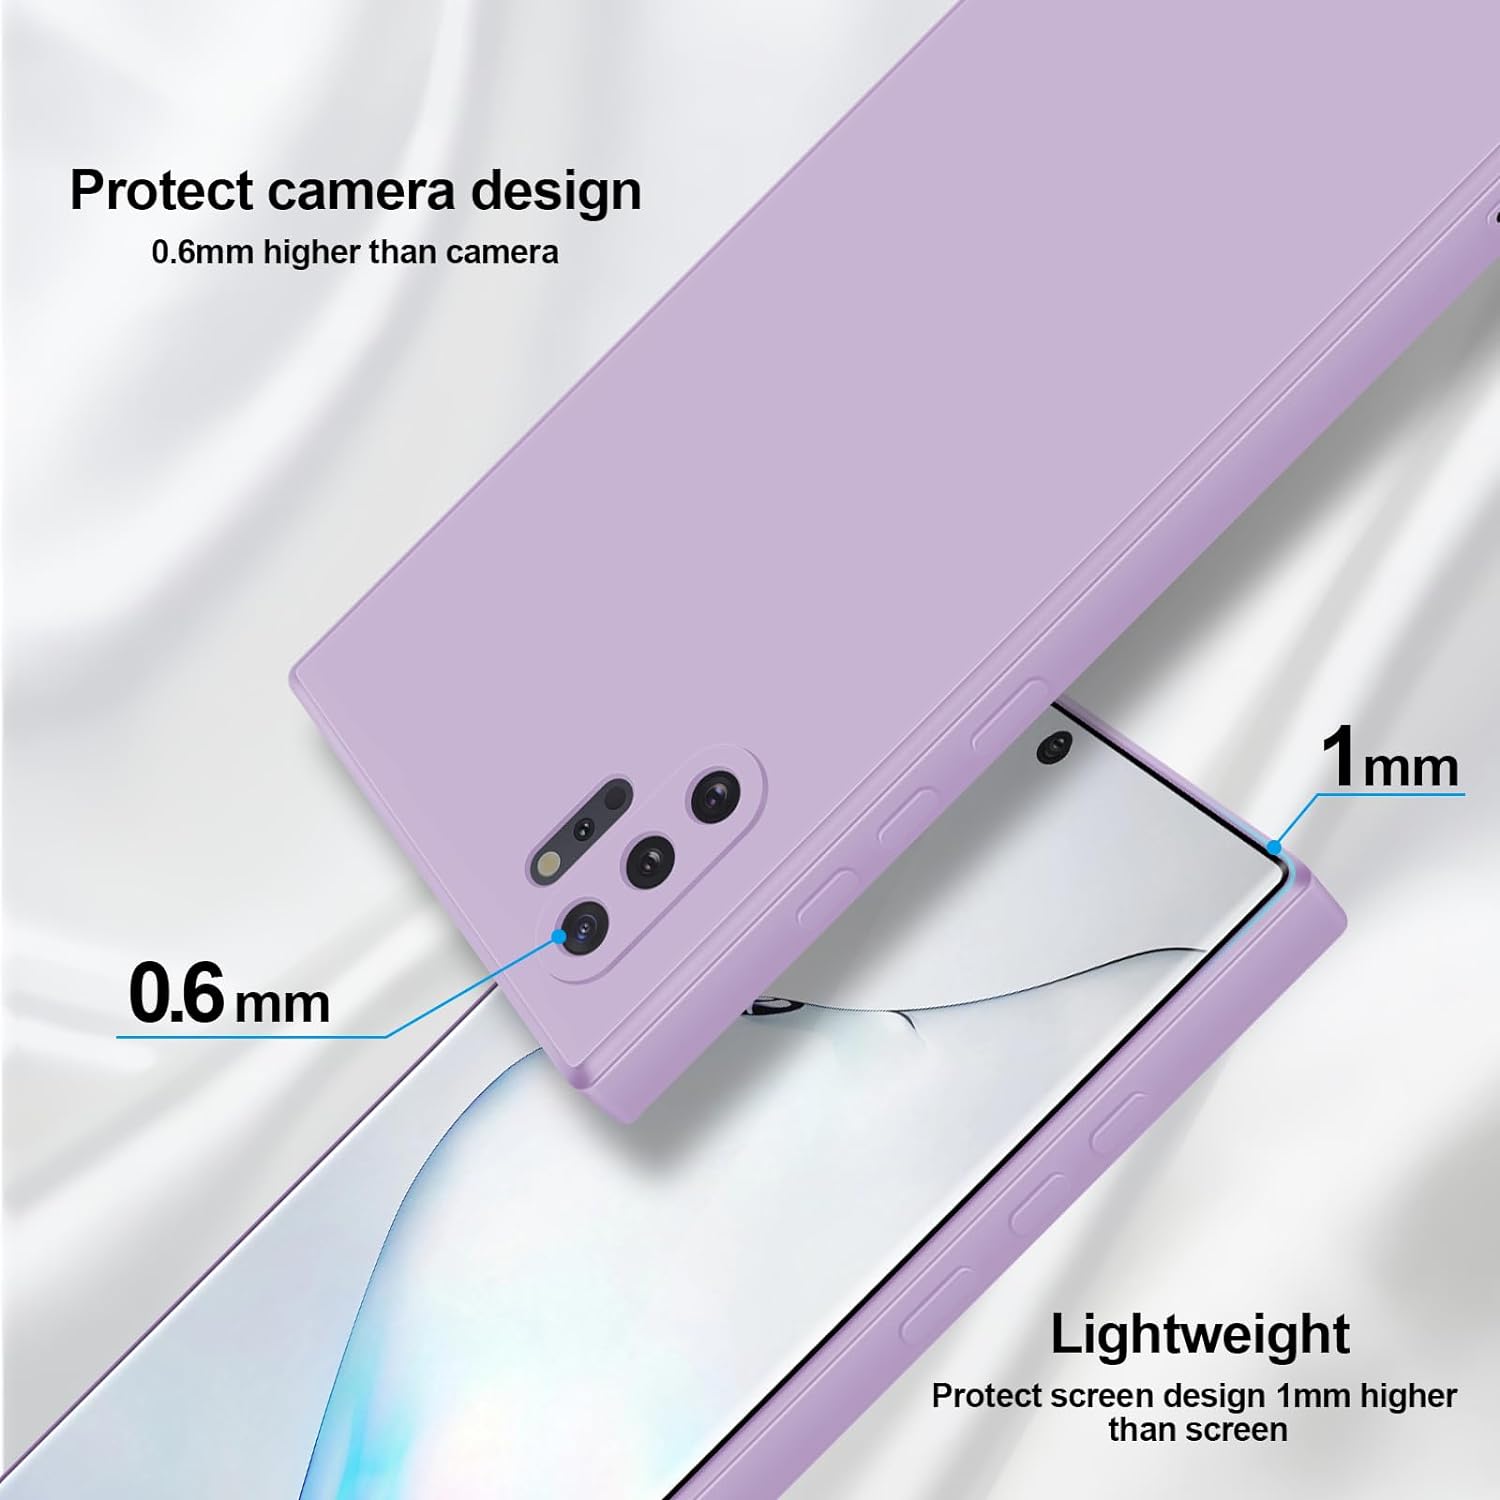 GiiYoon Silicone Case Compatible with Samsung Galaxy Note 10 Plus, Full Body Silky Soft Touch Phone Case with Camera Protection, Shockproof Cover with Microfiber Lining, Purple